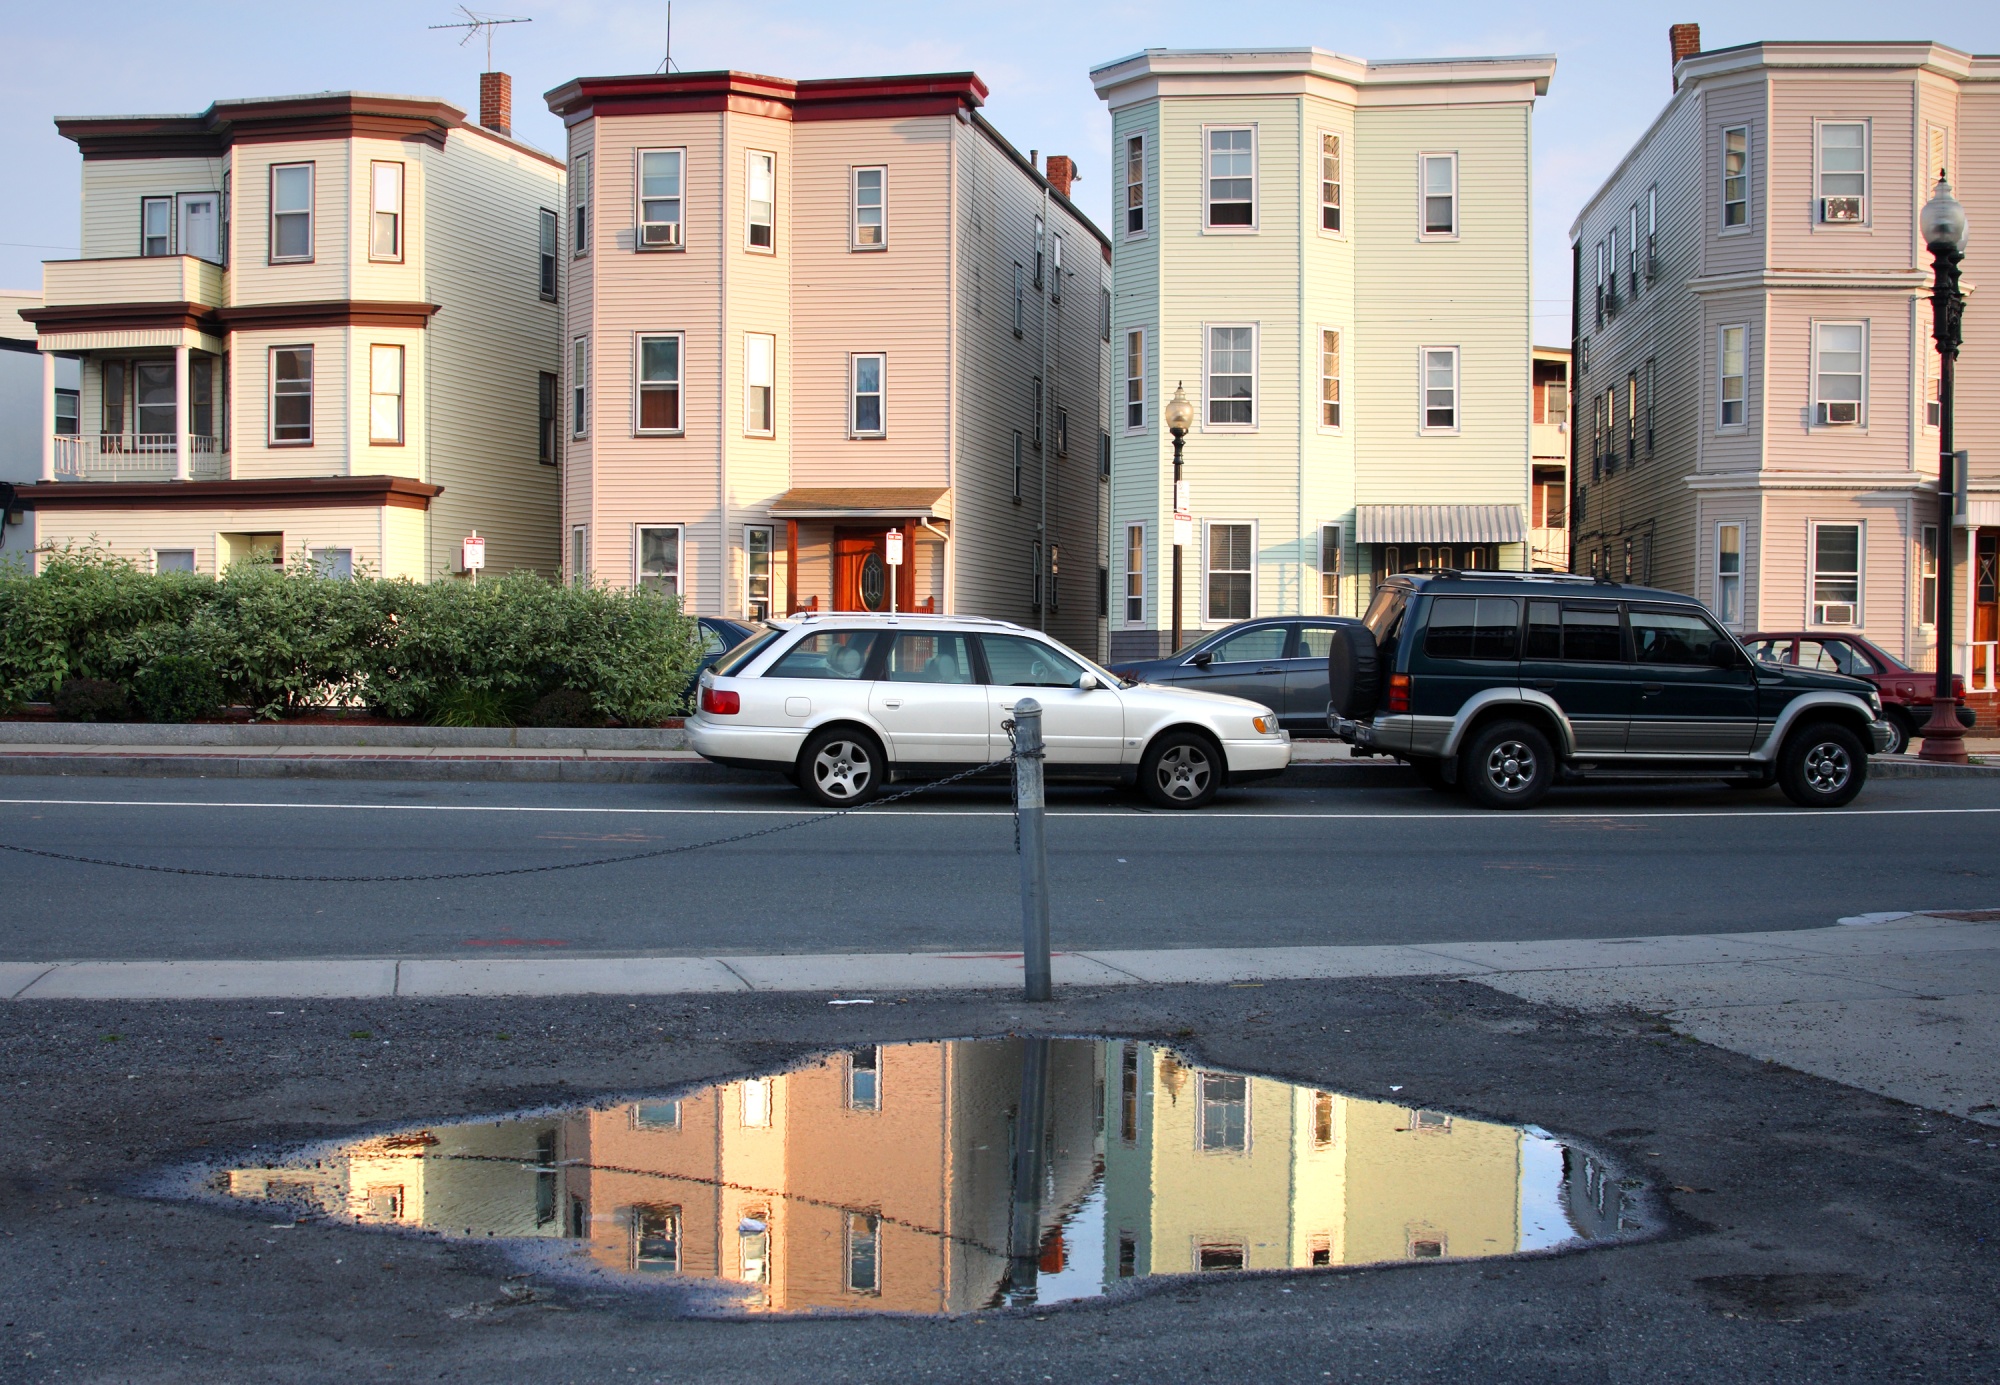 Boston to Eliminate Some Parking Requirements to Spur Development